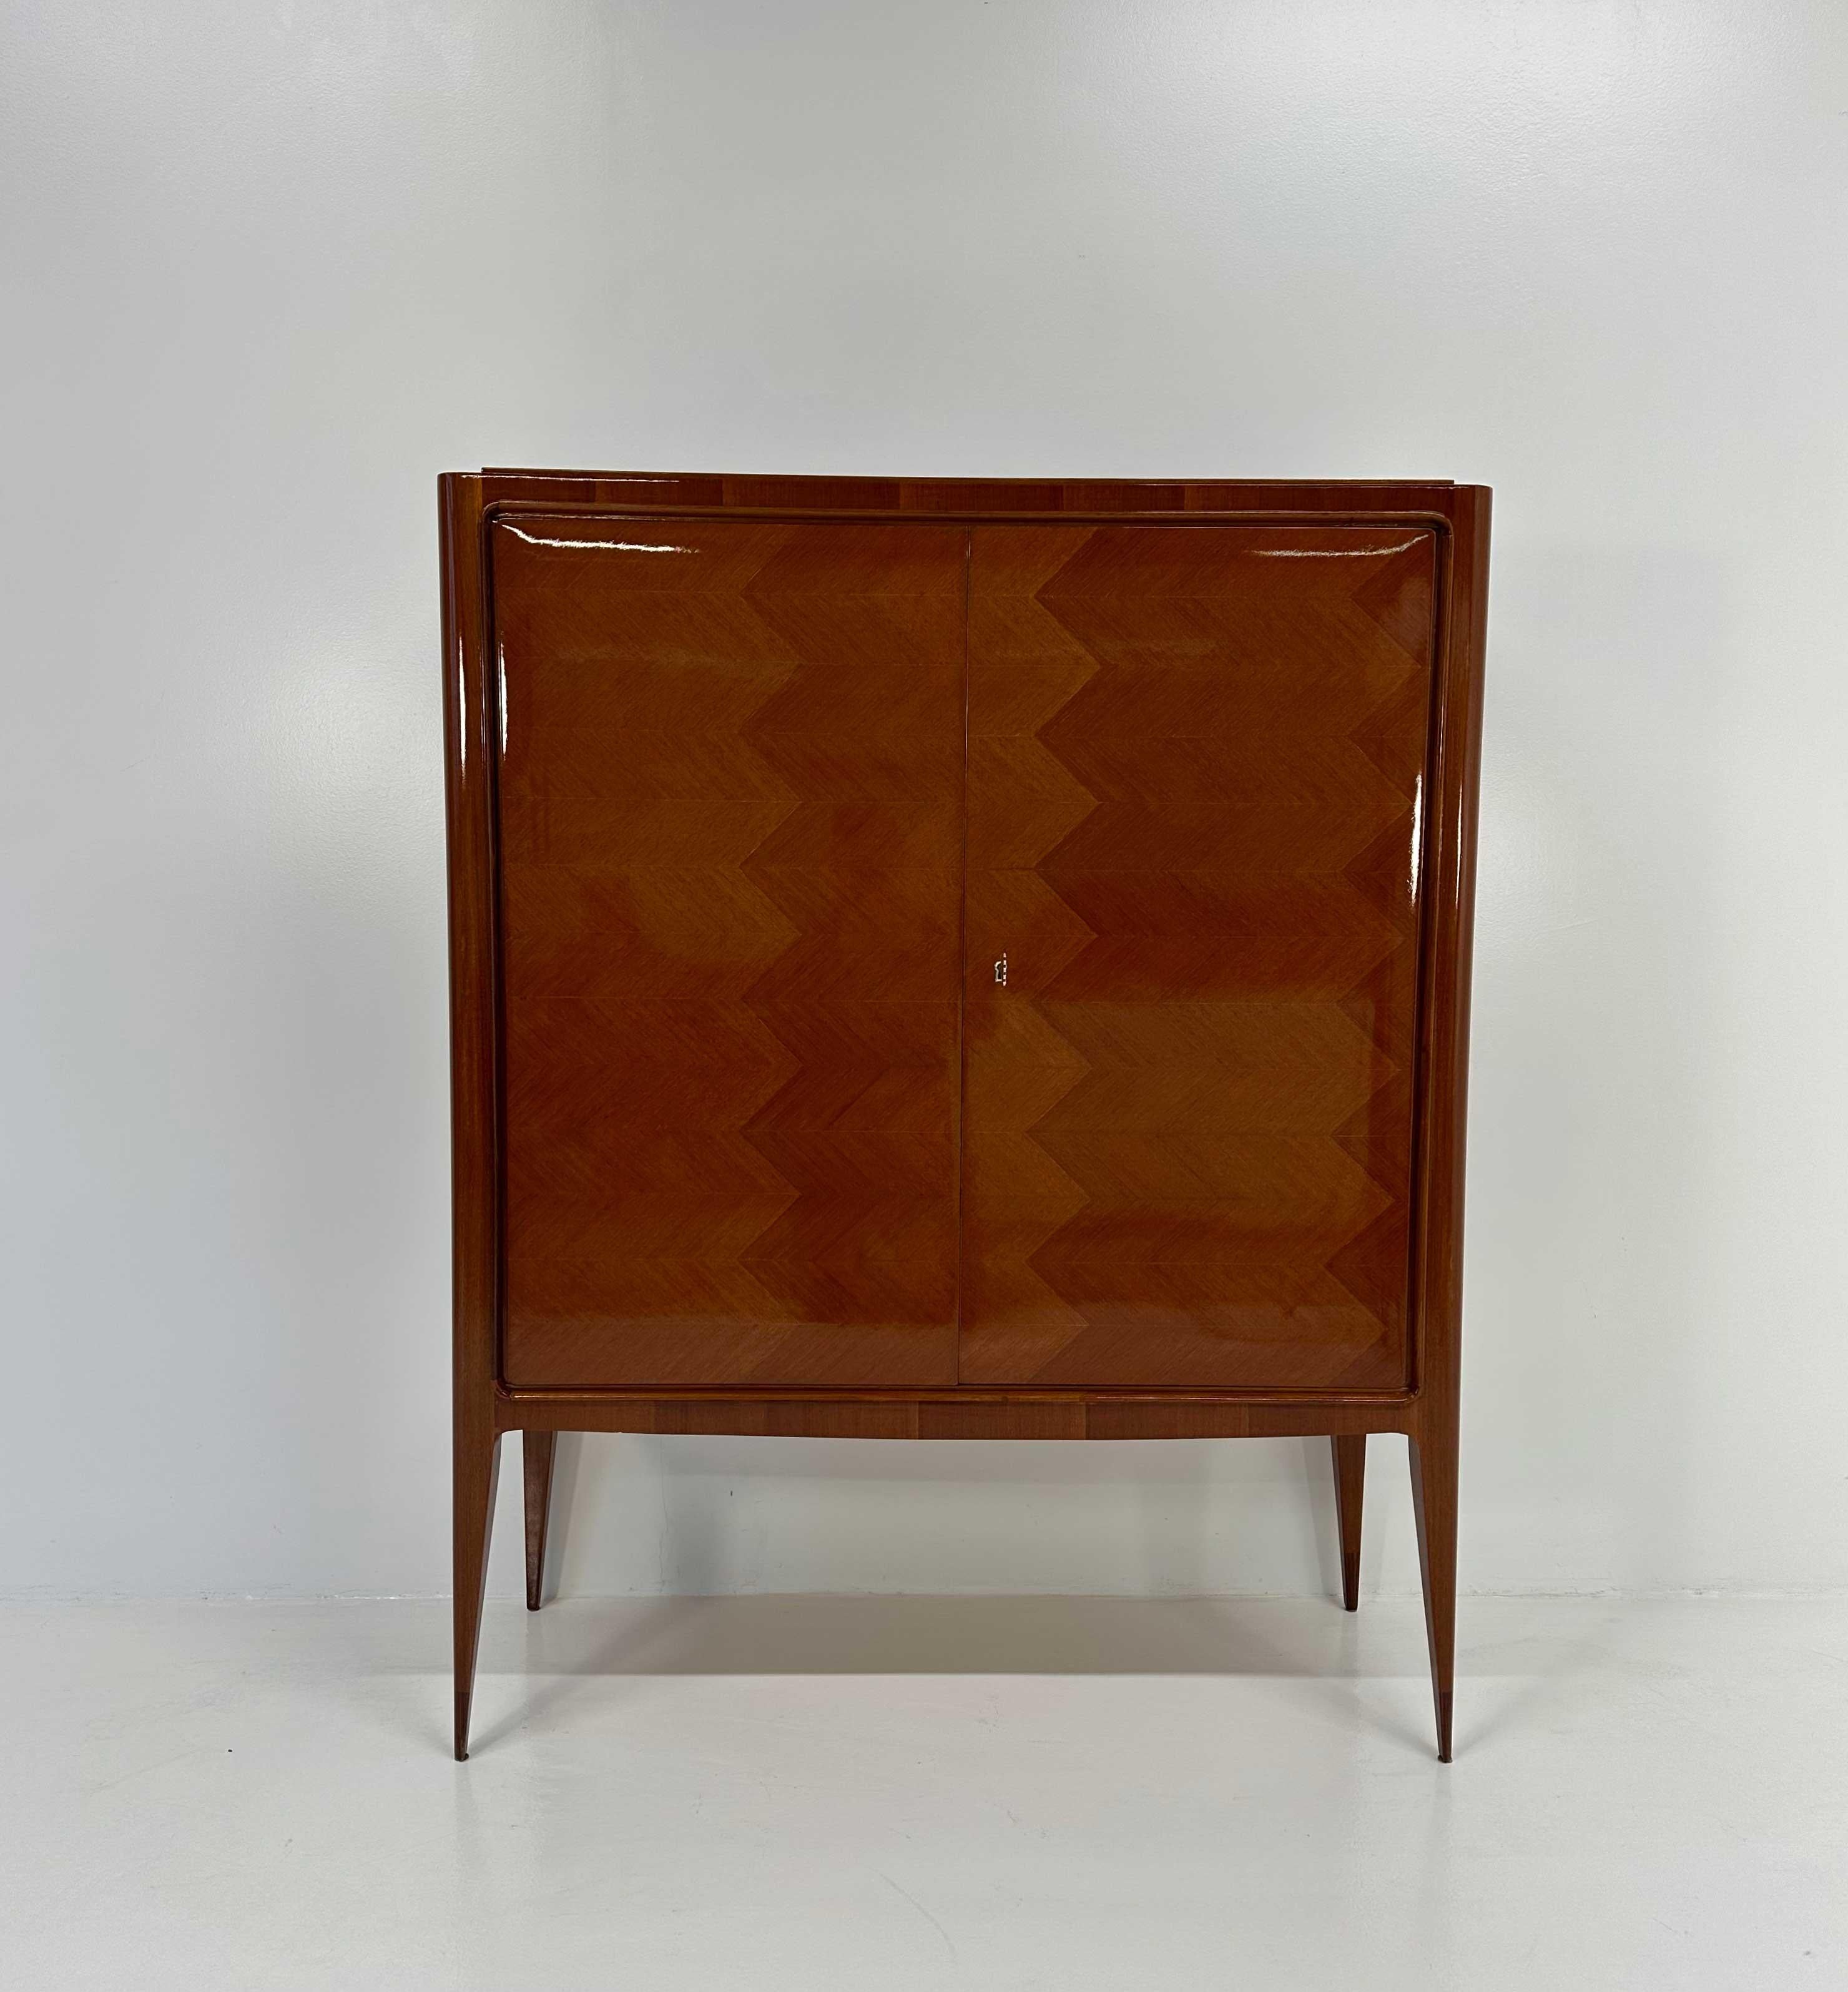 This bar cabinet was produced in Italy in the 1950s by Paolo Buffa. 
The external structure is completely made of teak wood. 
The beauty of this piece is crowned by the elegant interiors, characterized by the presence of mirrors covering the walls,